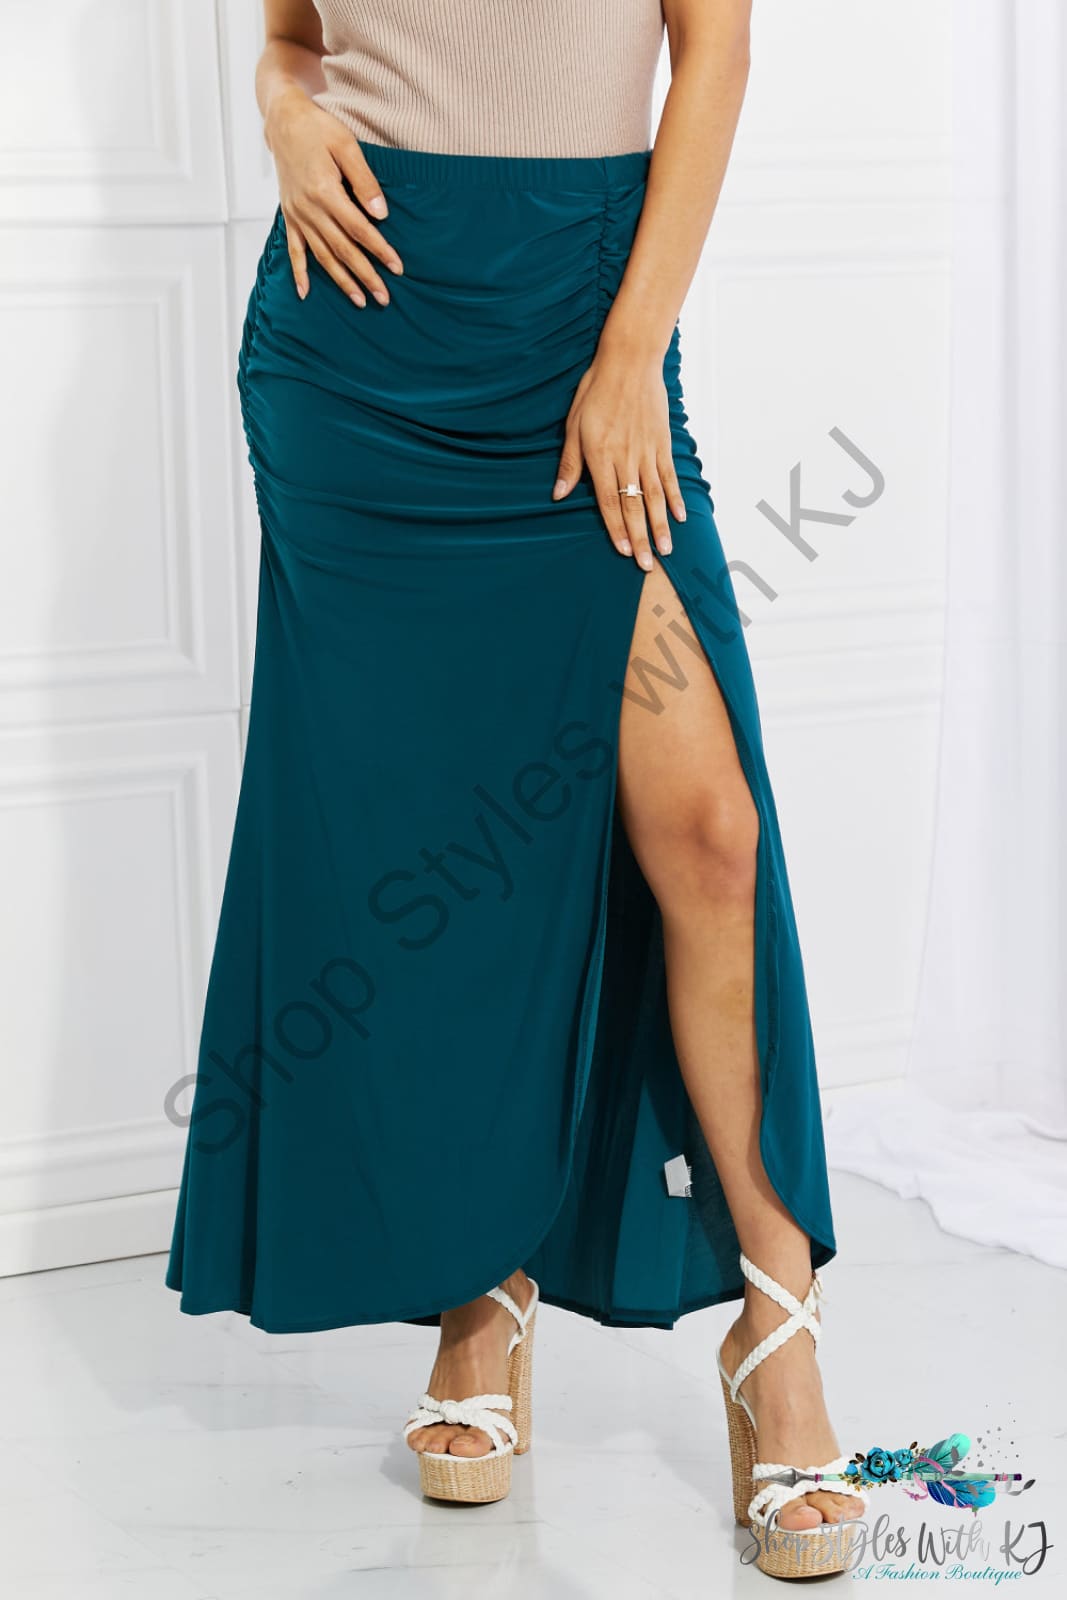 Up And Ruched Slit Maxi Skirt In Teal / S Skirts